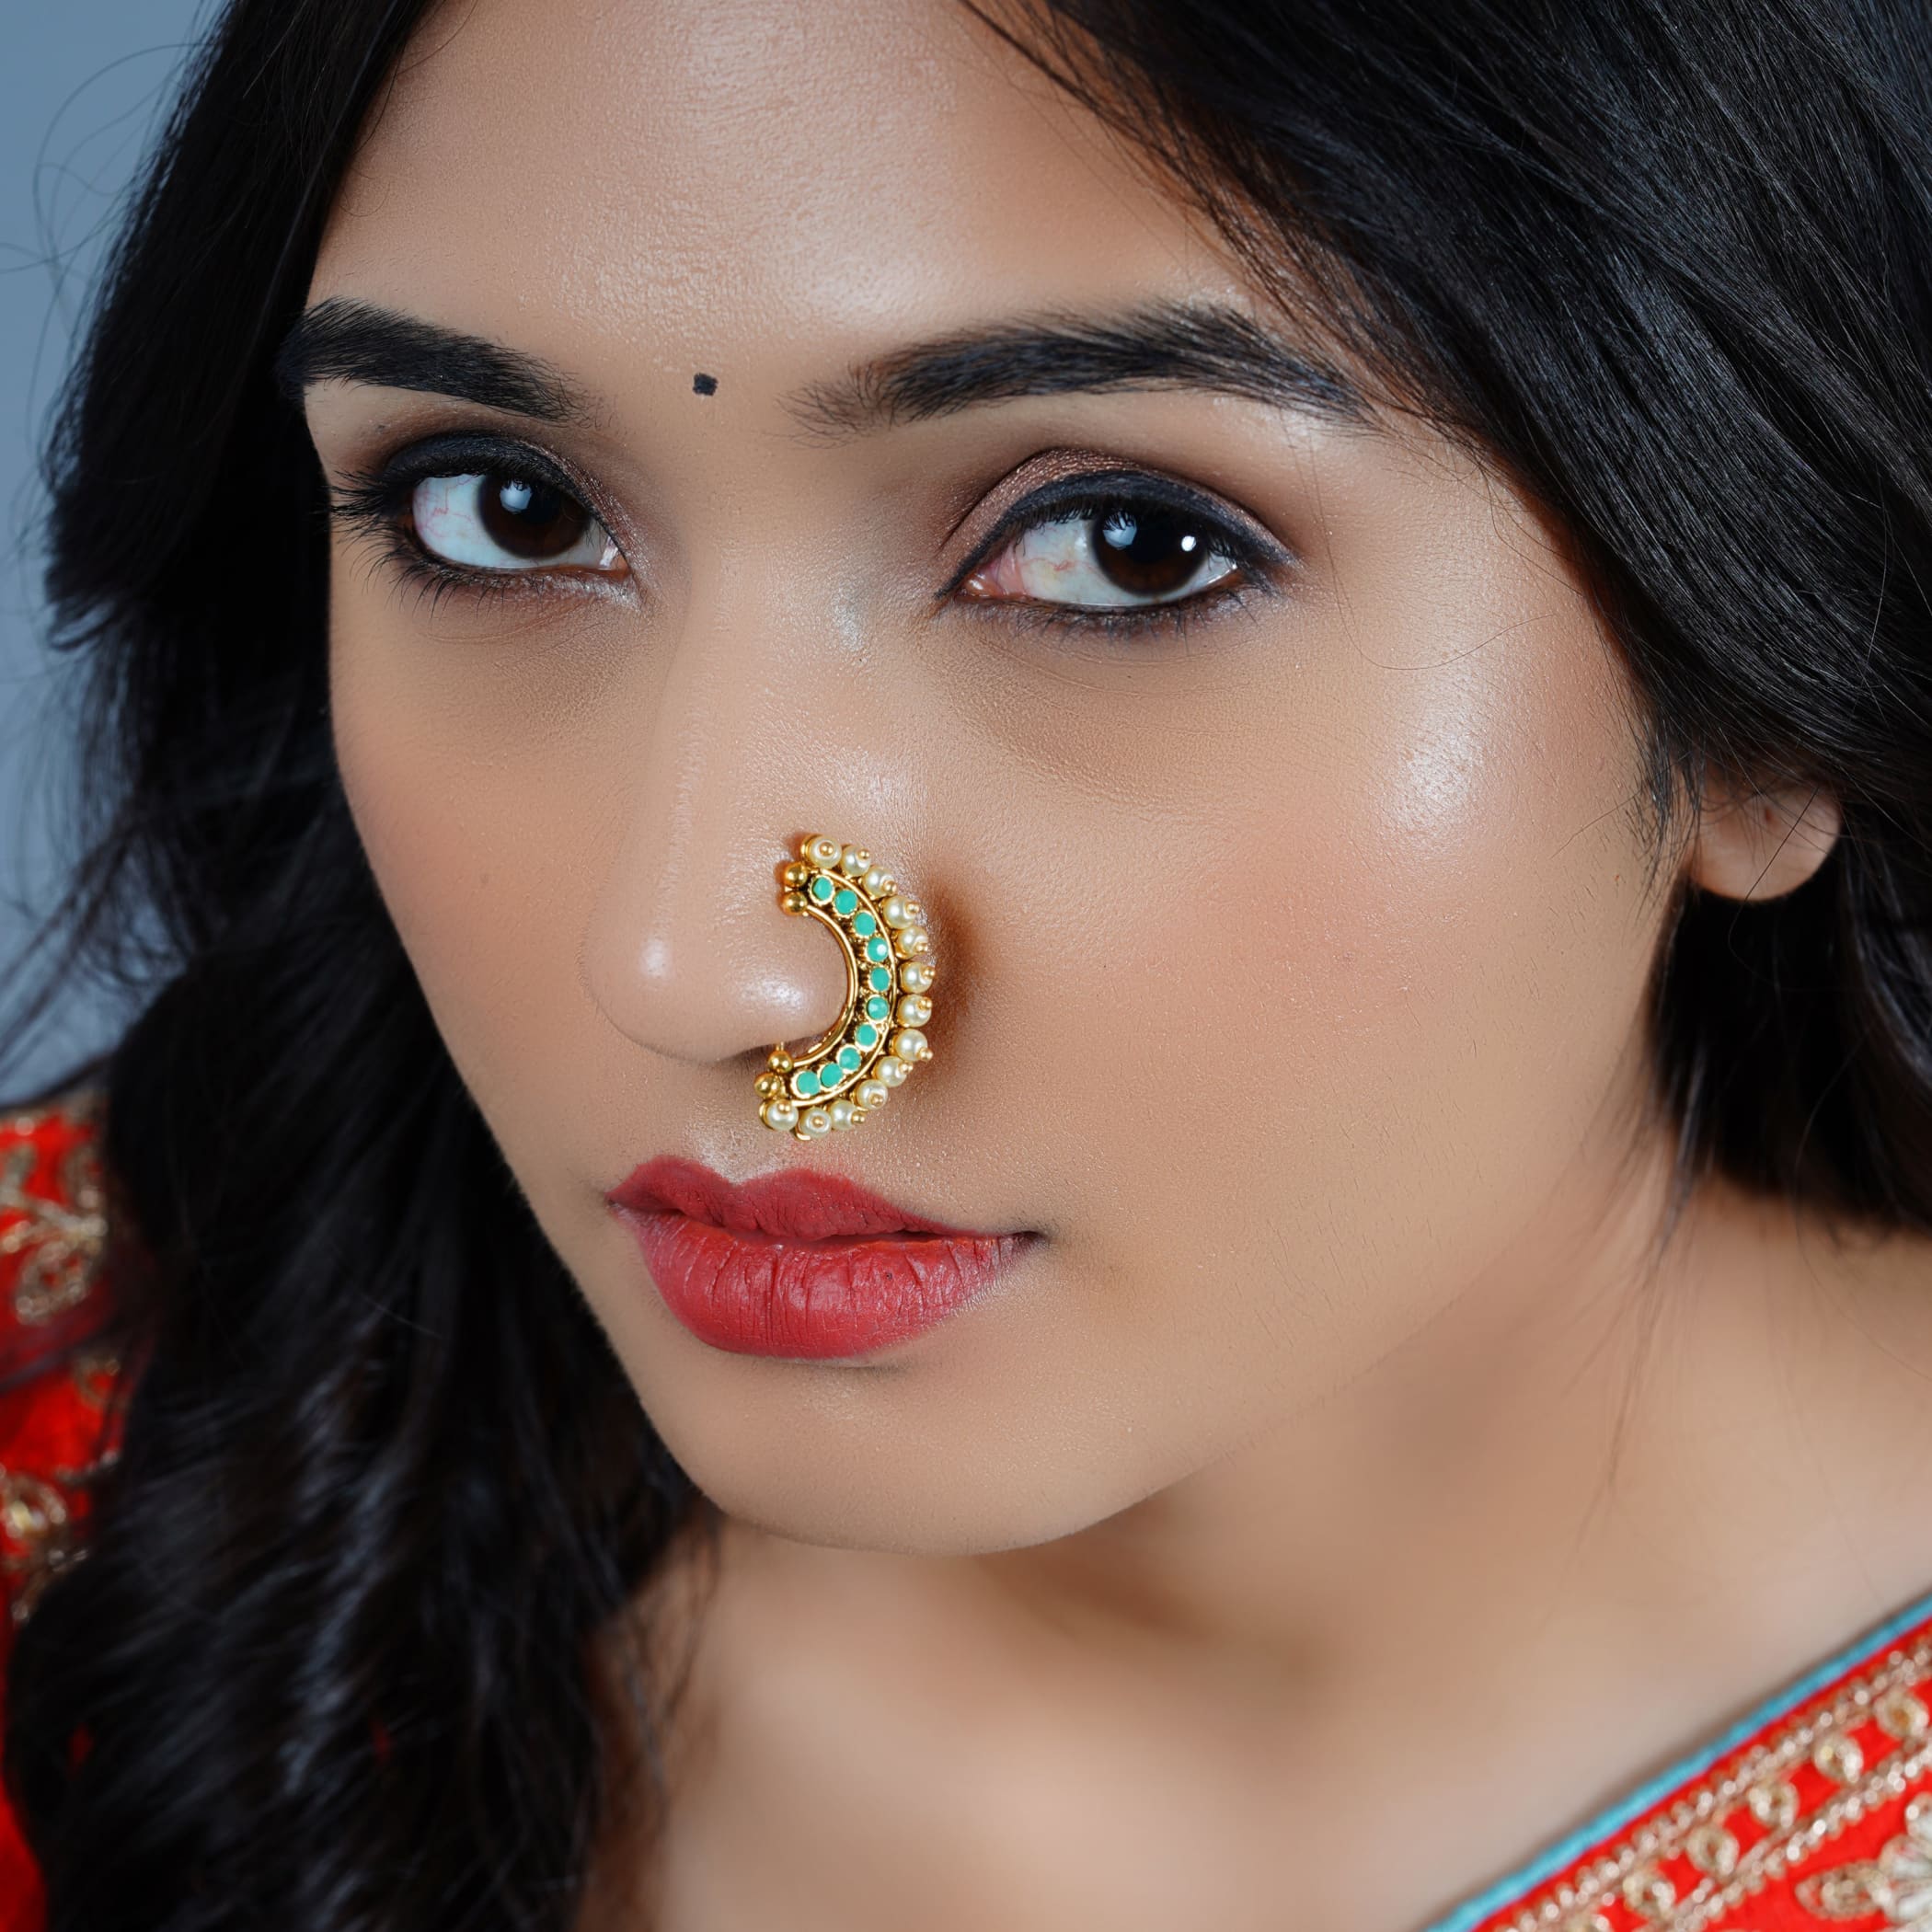 Buy MEENAZ Jewellery Traditional Maharashtrian Nath Nose Rings White Ruby  Stone Gold Pearl Beads Nath for Women Girl- Nose Ring-119 at Amazon.in